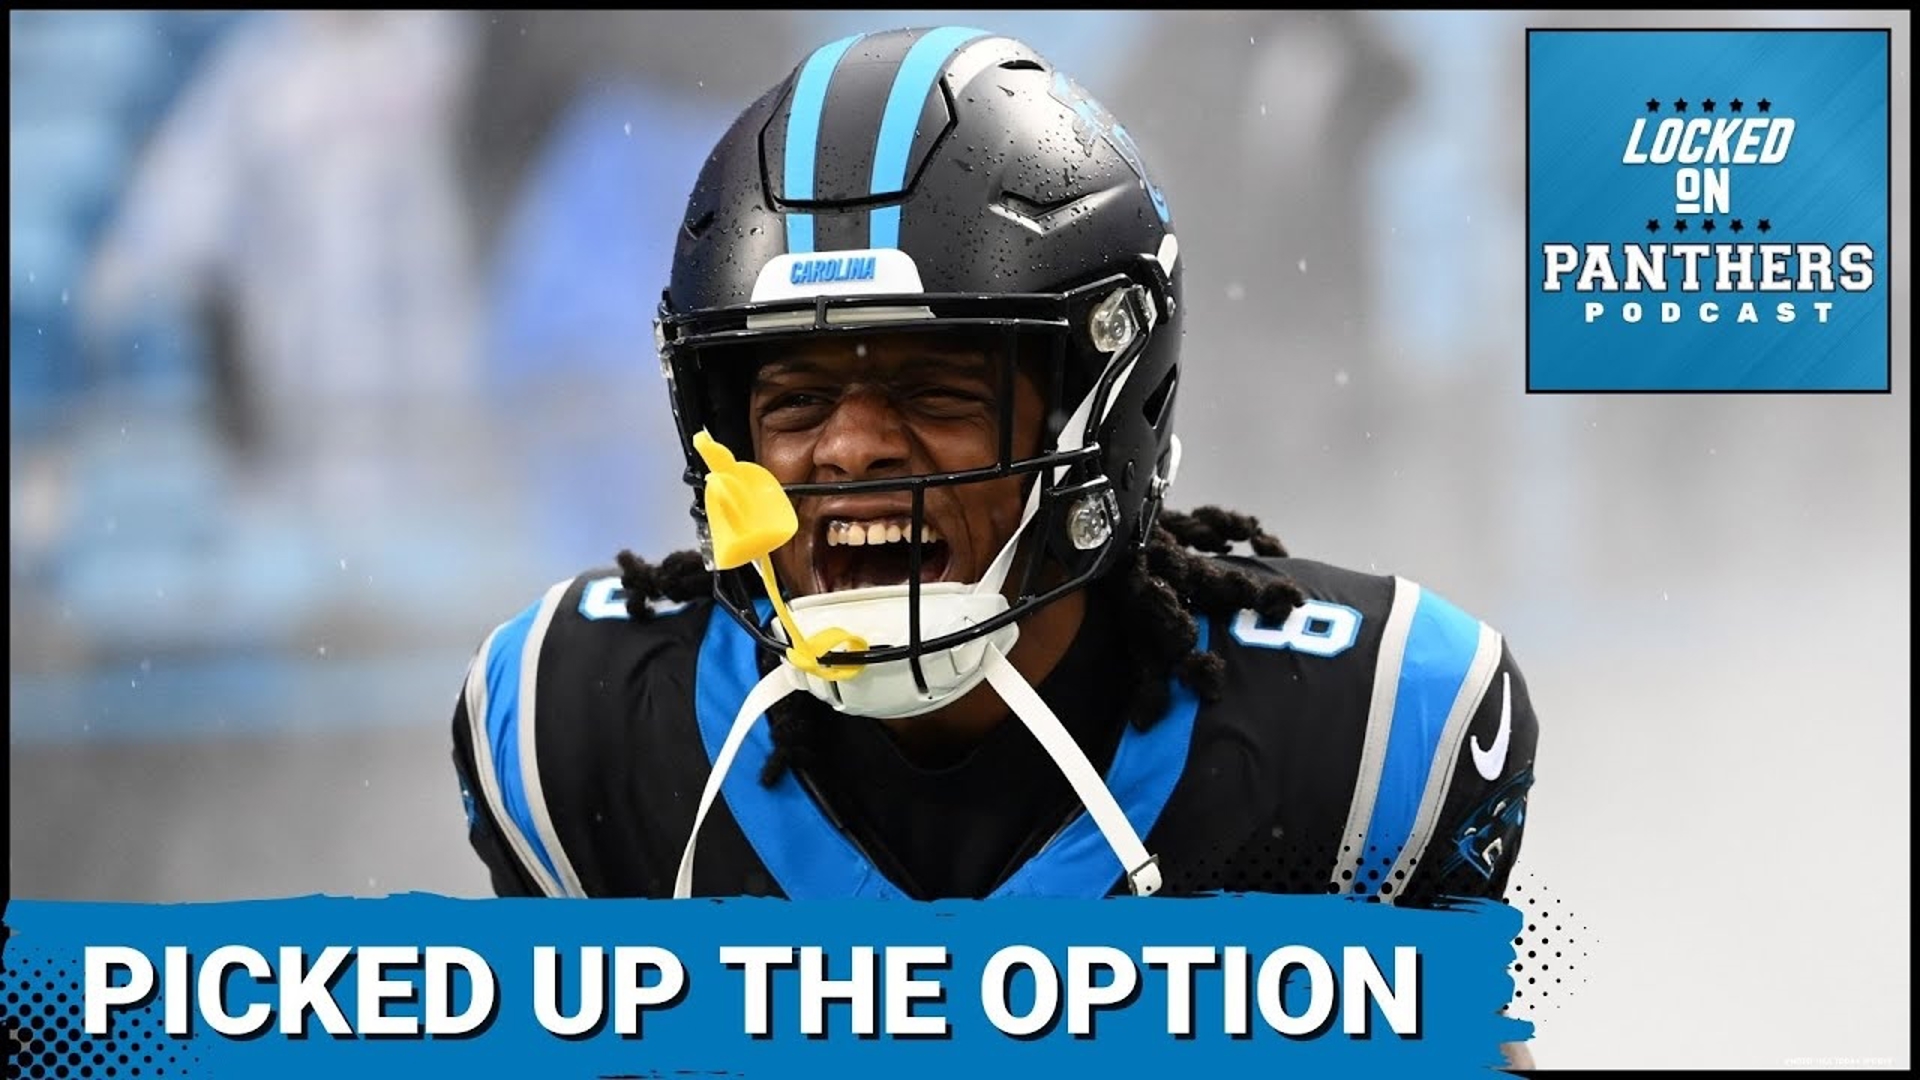 Breaking news on a Friday afternoon as Ian Rapoport reported that the Carolina Panthers have opted to exercise the fifth-year option on Jaycee Horn's contract.